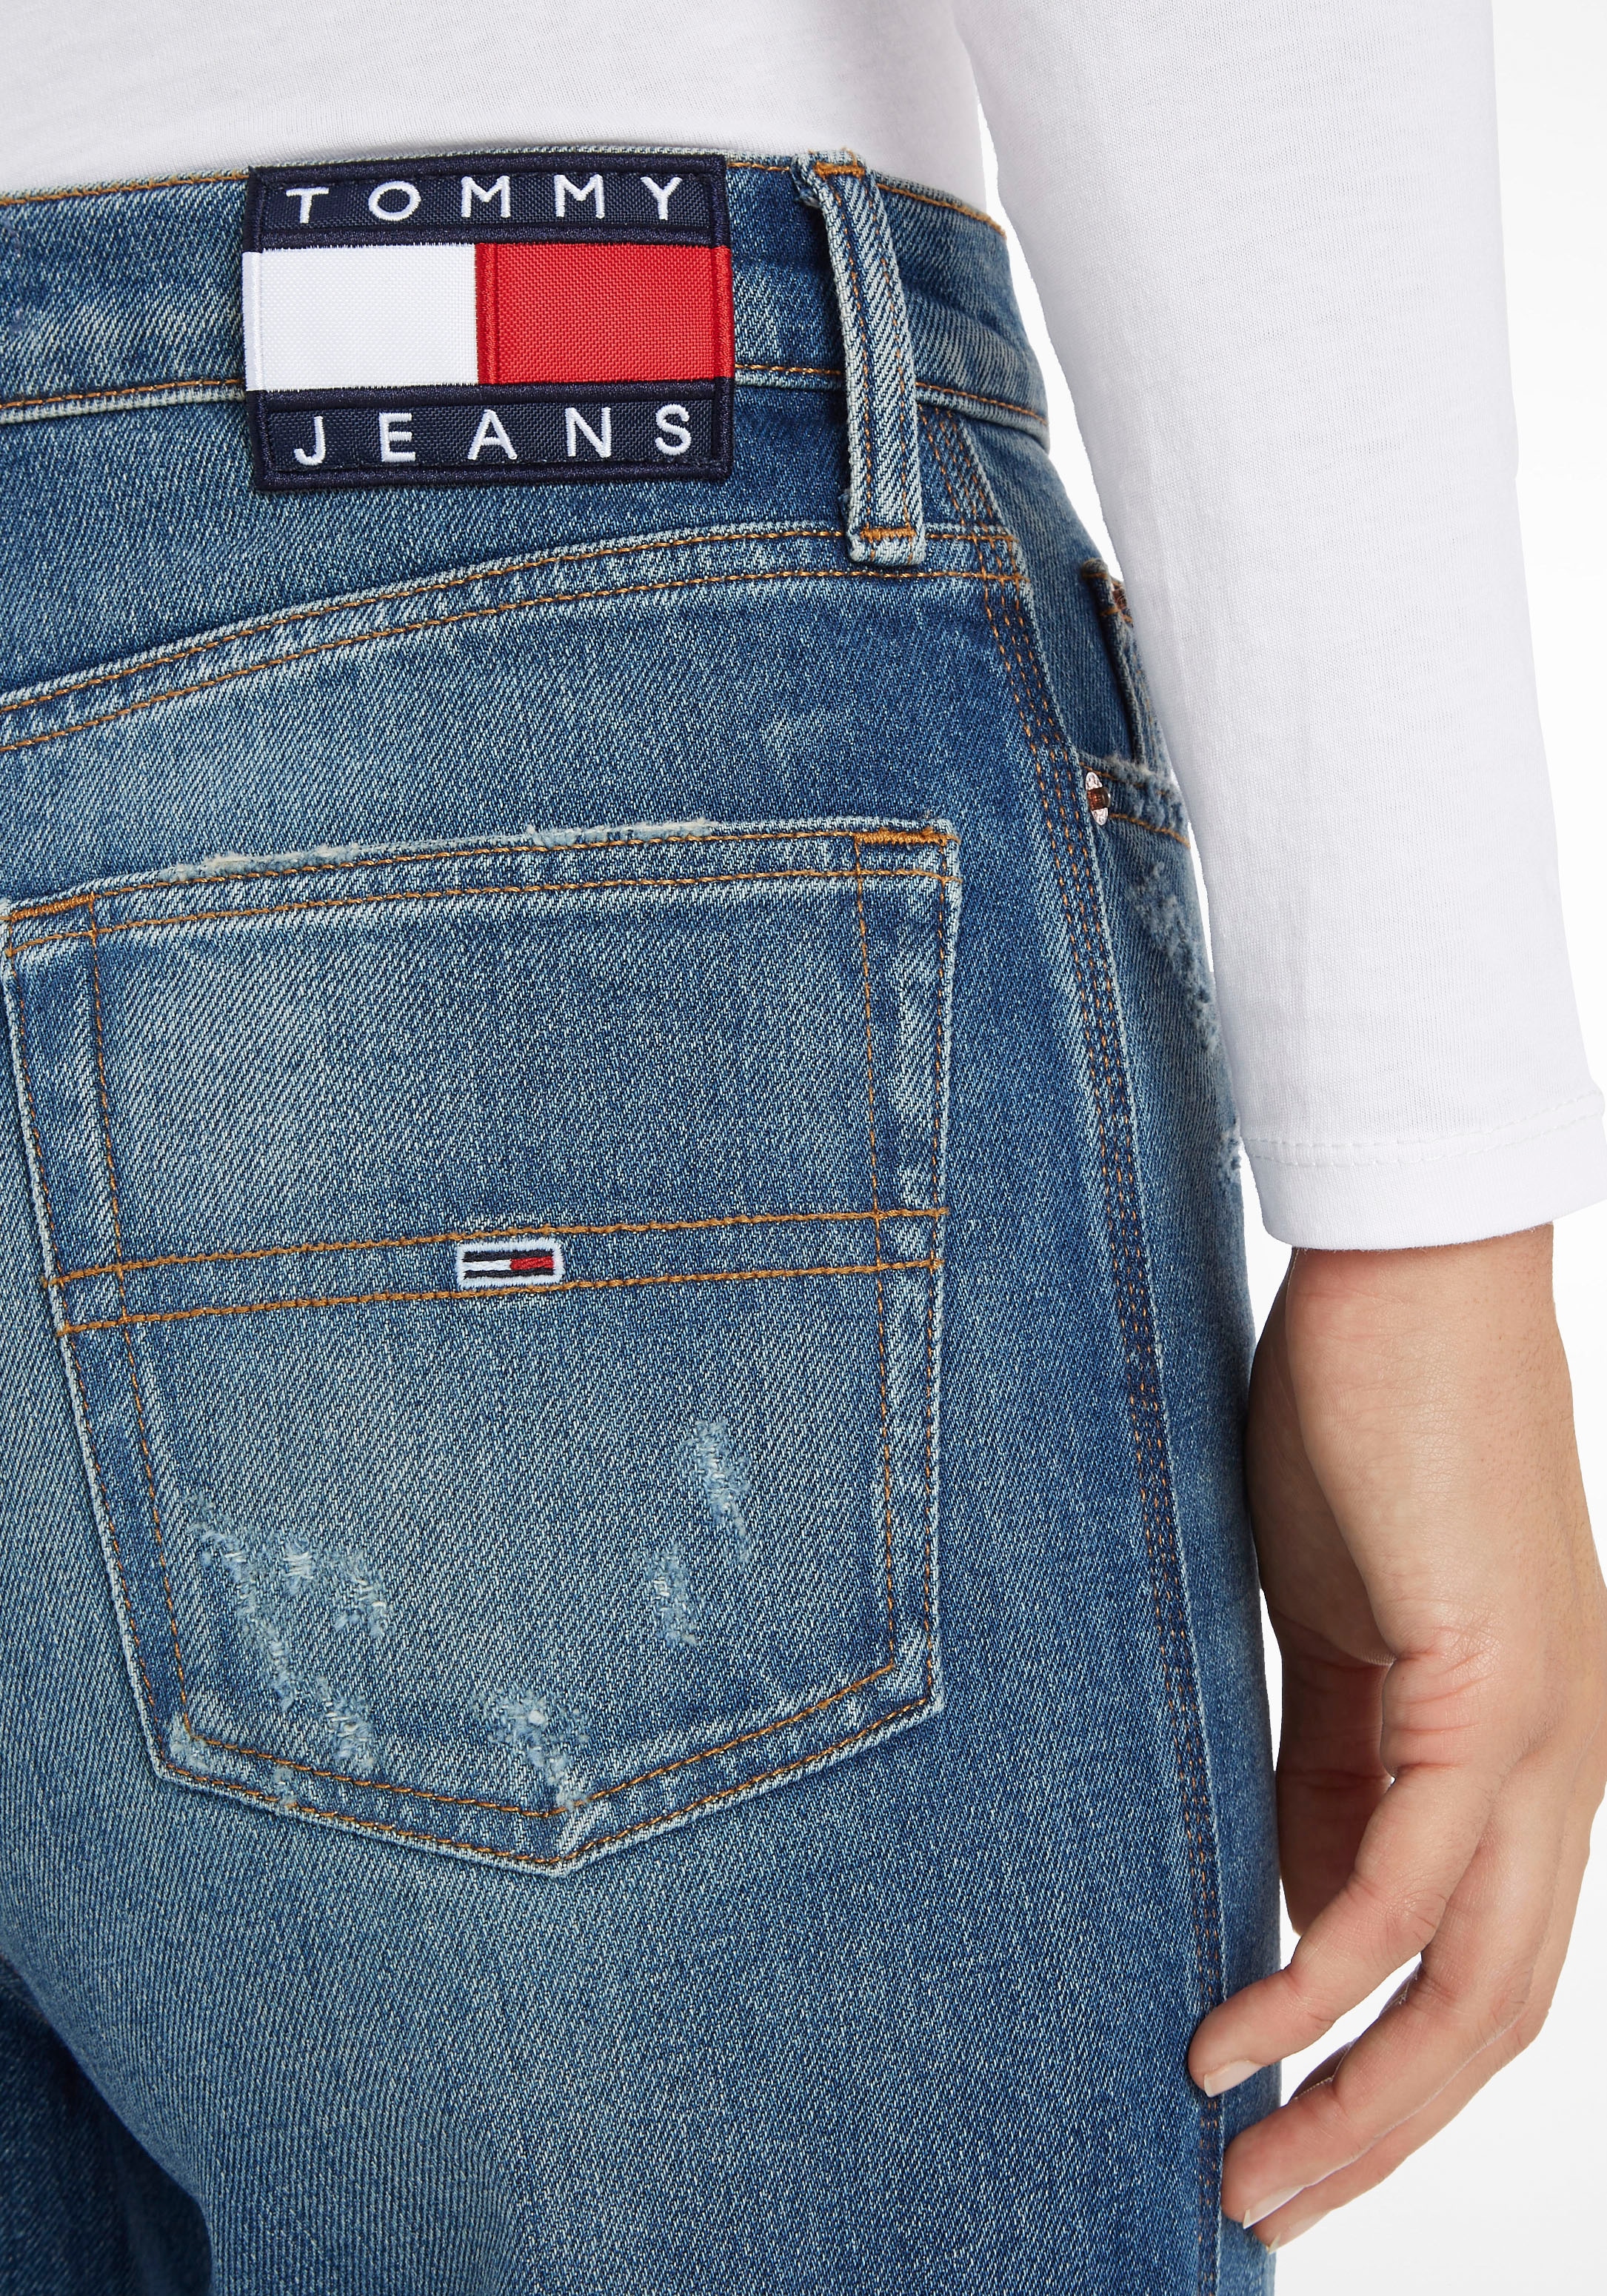 Tommy Jeans Weite mit ♕ Tommy bei Jeans, Jeans Logobadges